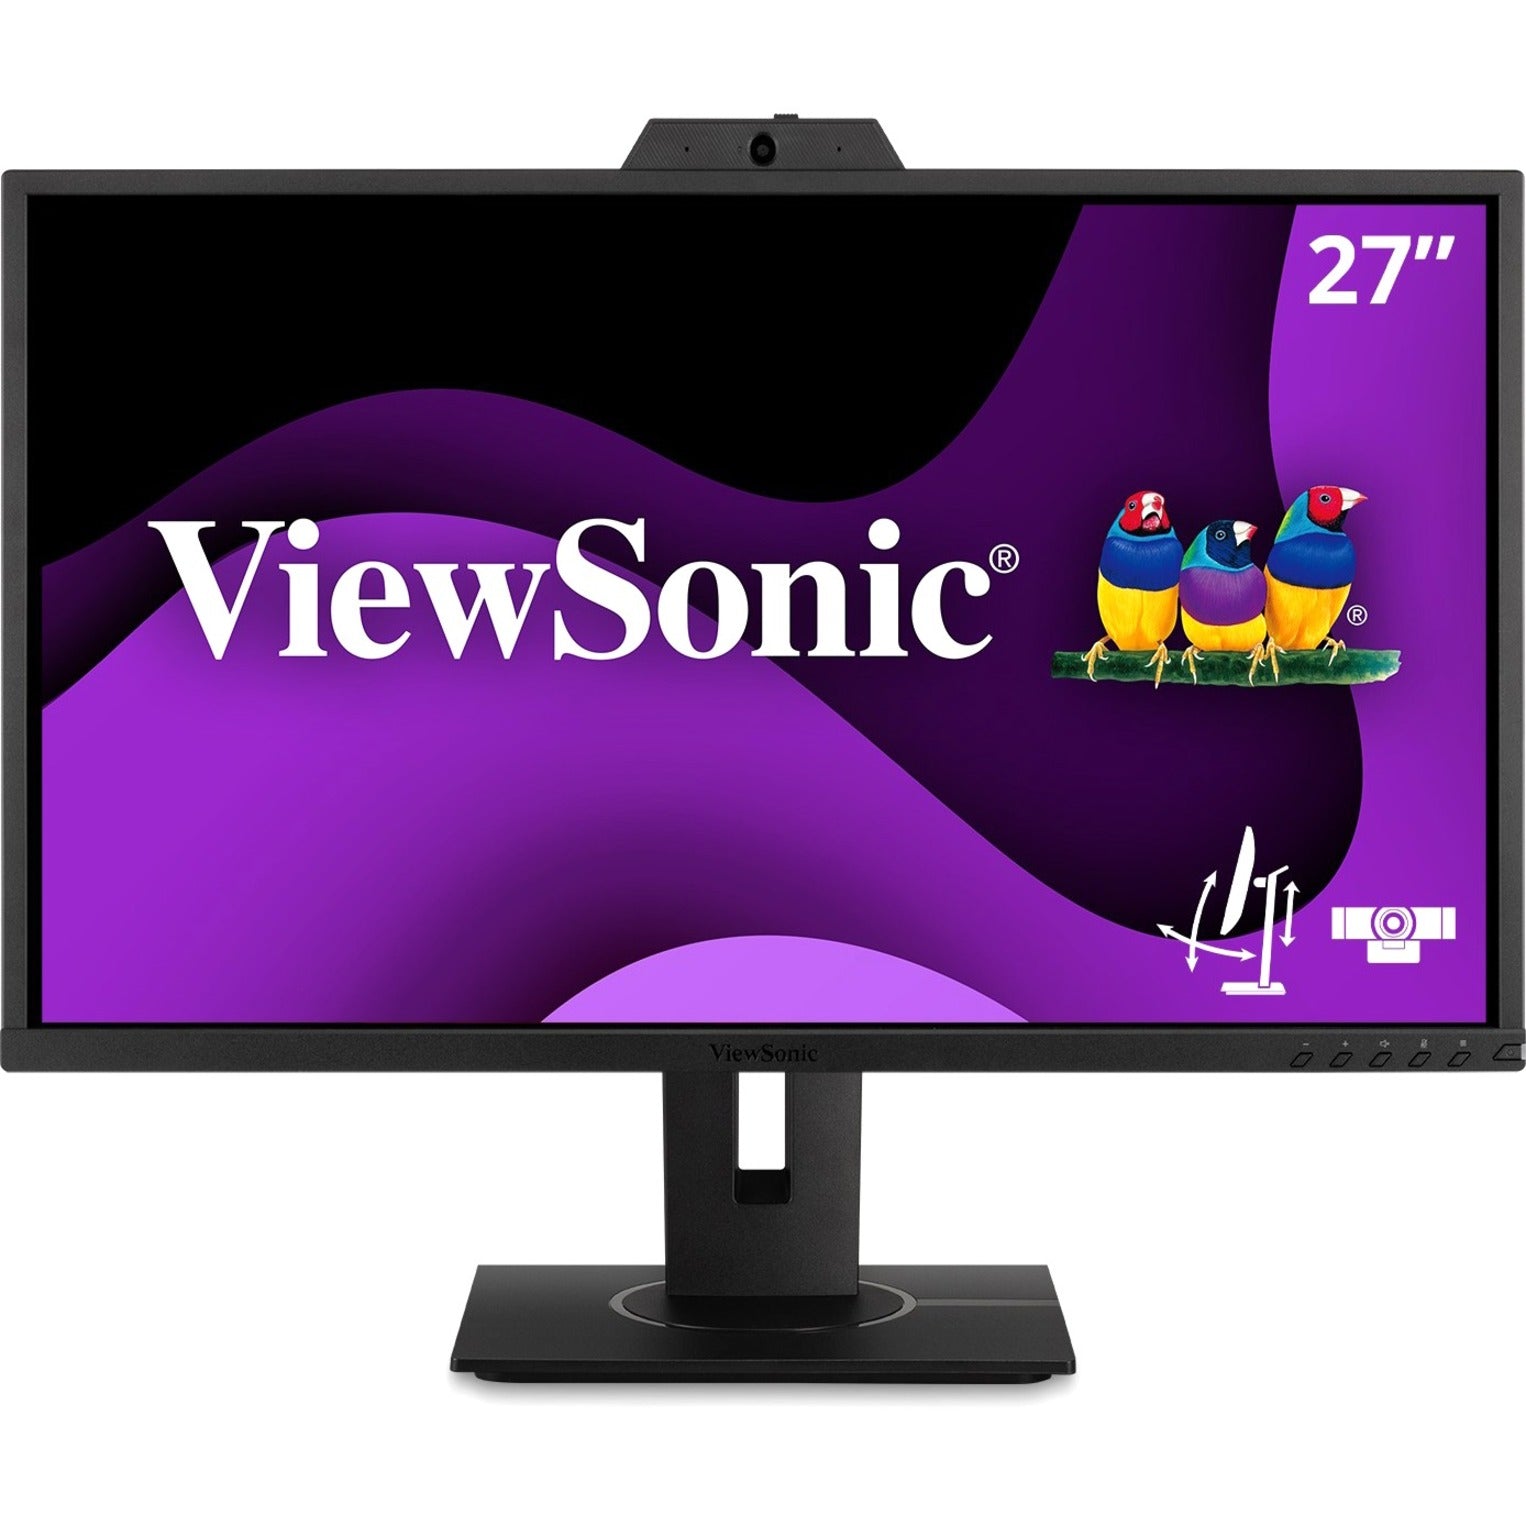 ViewSonic VG2740V 27" IPS Full HD Video Conferencing Monitor, SuperClear IPS, Built-in Webcam, Microphone, USB Hub, HDMI, DisplayPort